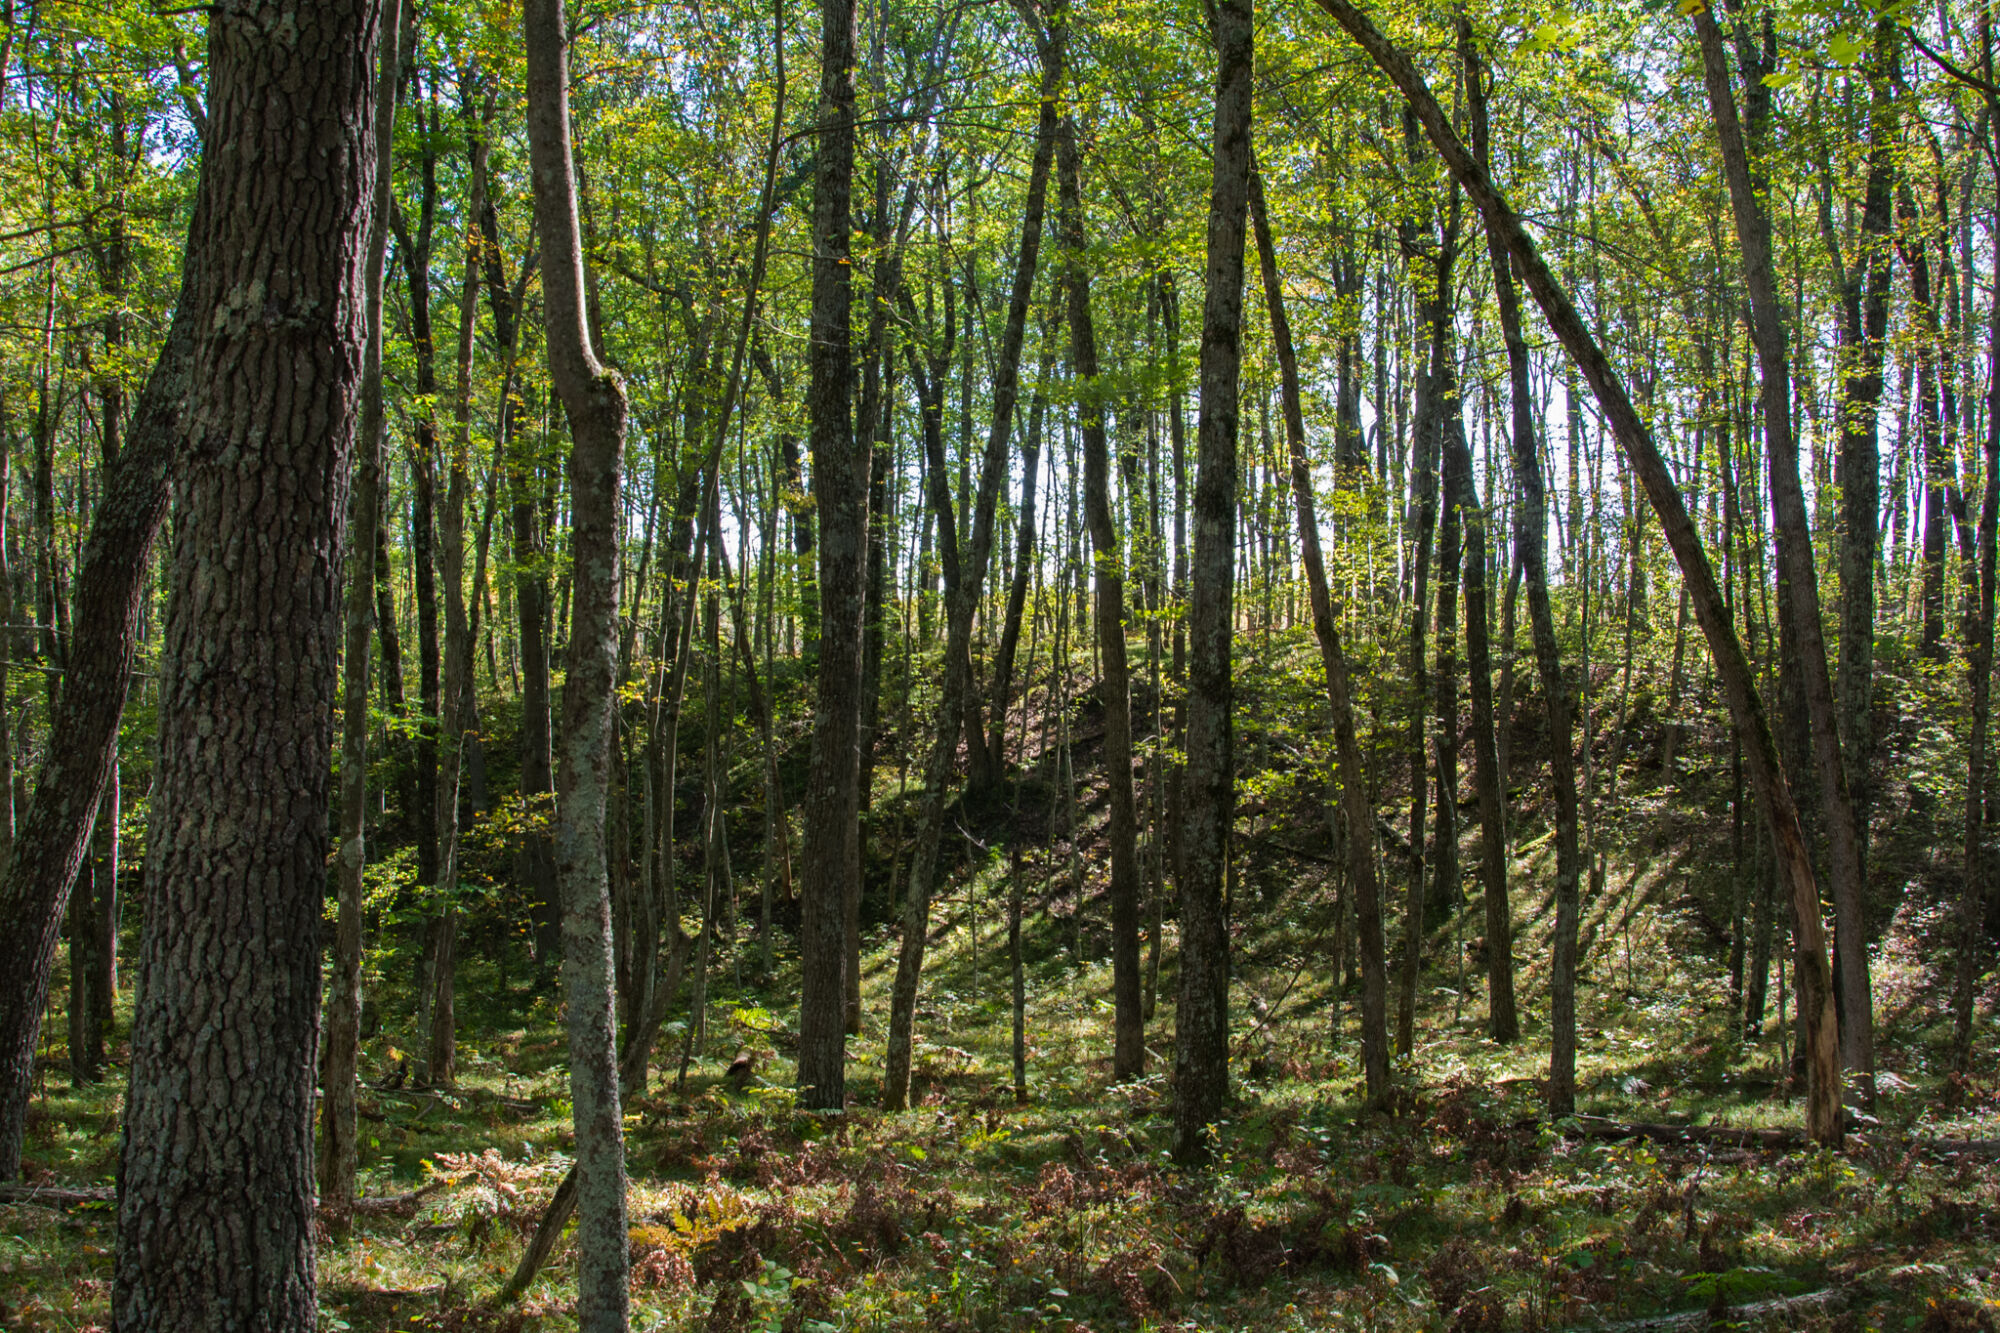 The hilly forest on the Upriver Nature Preserve.